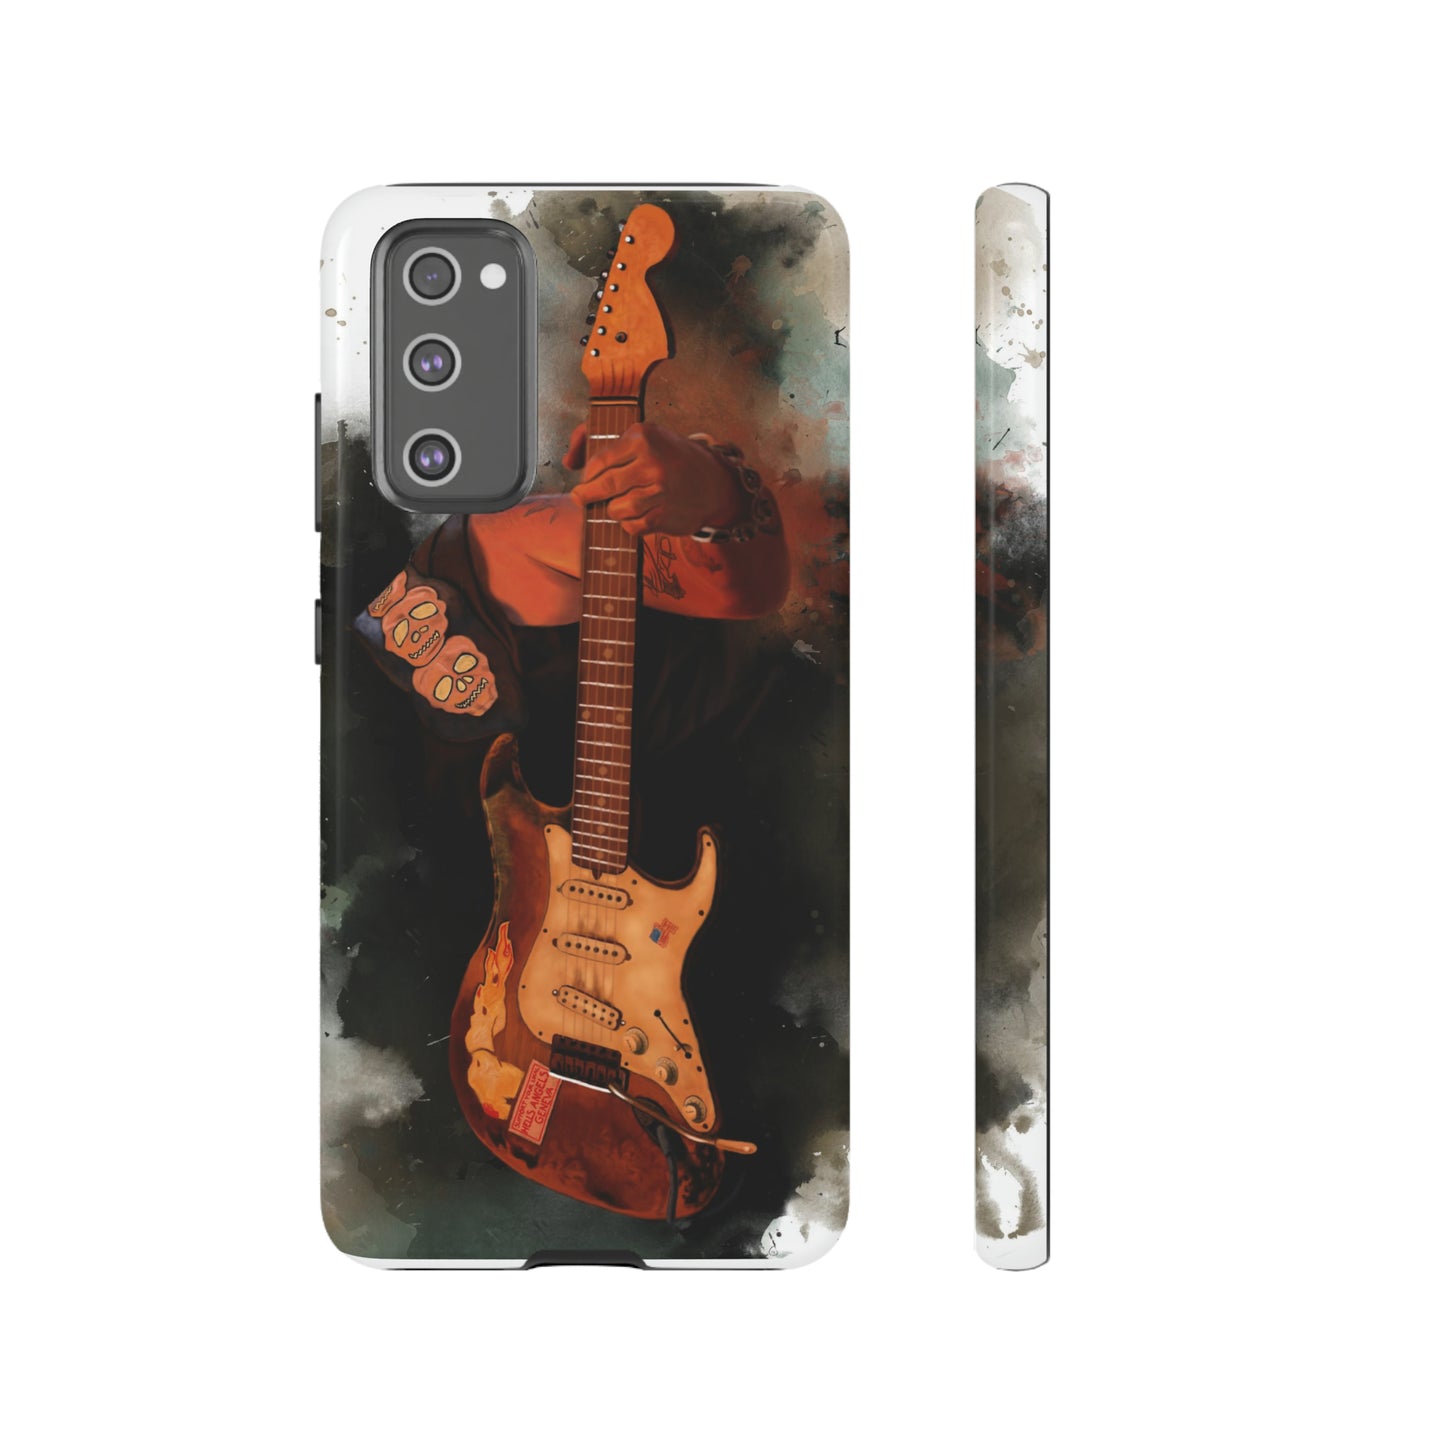 Digital painting of a heavy used vintage sunburst electric guitar with hand printed on samsung phone case